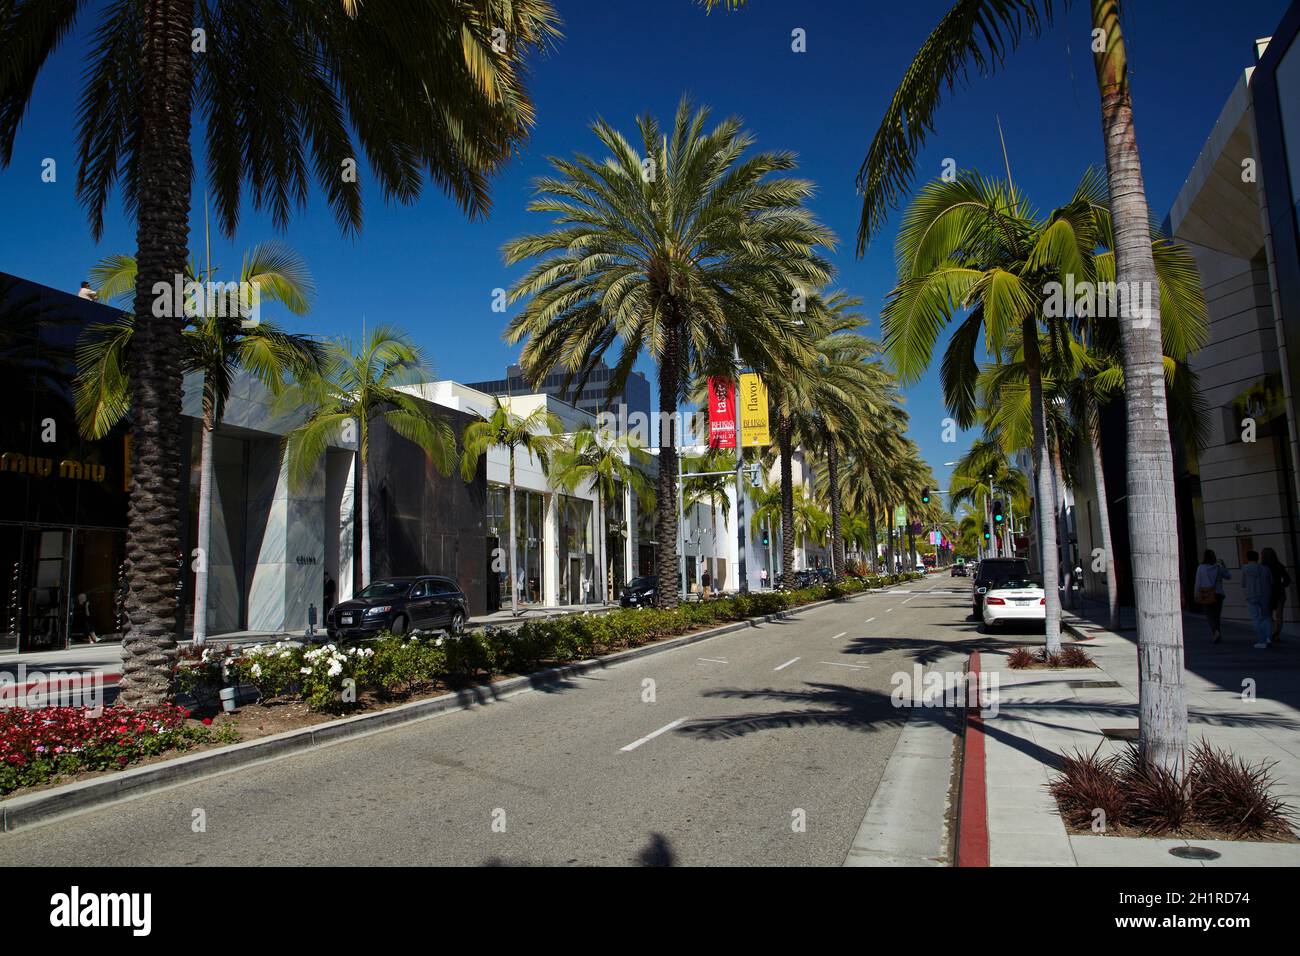 Chanel Store on Rodeo Drive in Beverly Hills,Los Angeles,L.A.California,U.S.A.,California,U.S.A.,United  States of America,palm tree,exclusive Stock Photo - Alamy